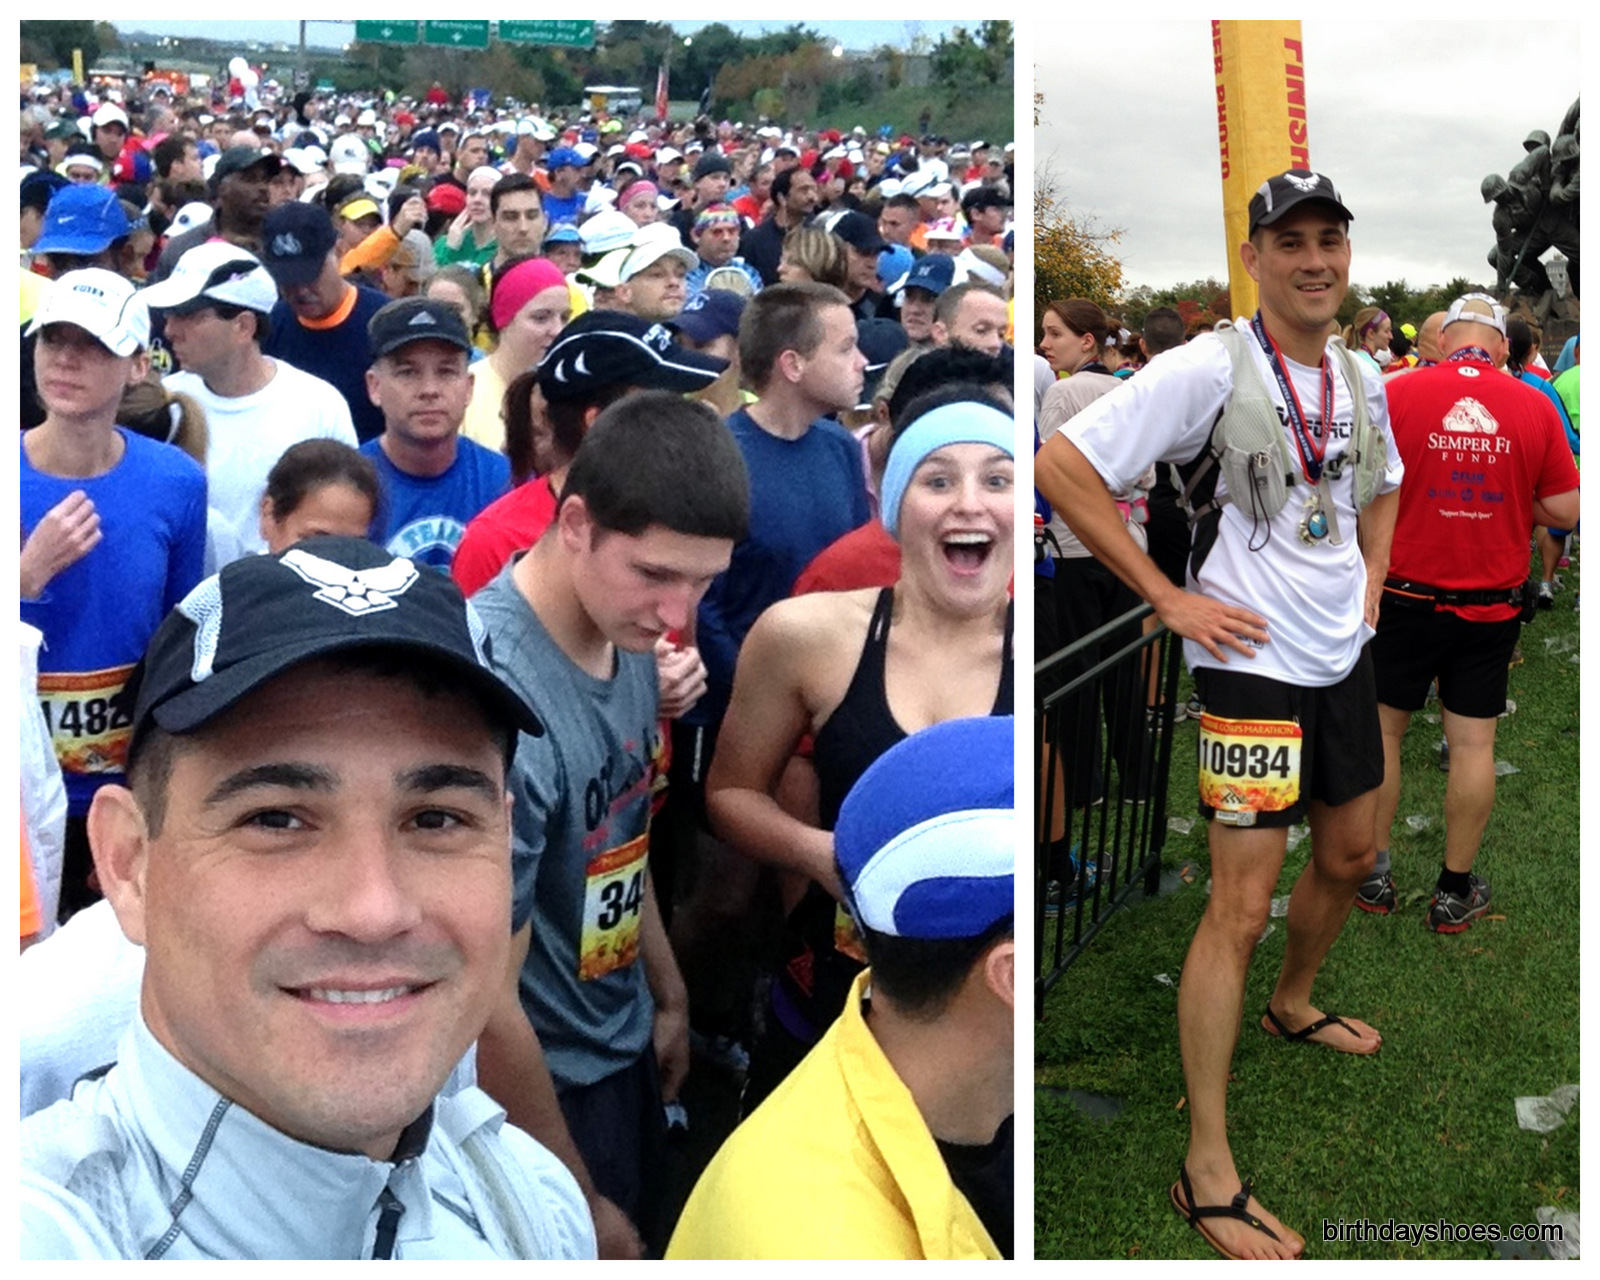 James (bottom left — nevermind the smiling runner photo-bombing him!) before and after running 26.2 miles in his Luna Sandals huaraches in the Marine Corps Marathon.